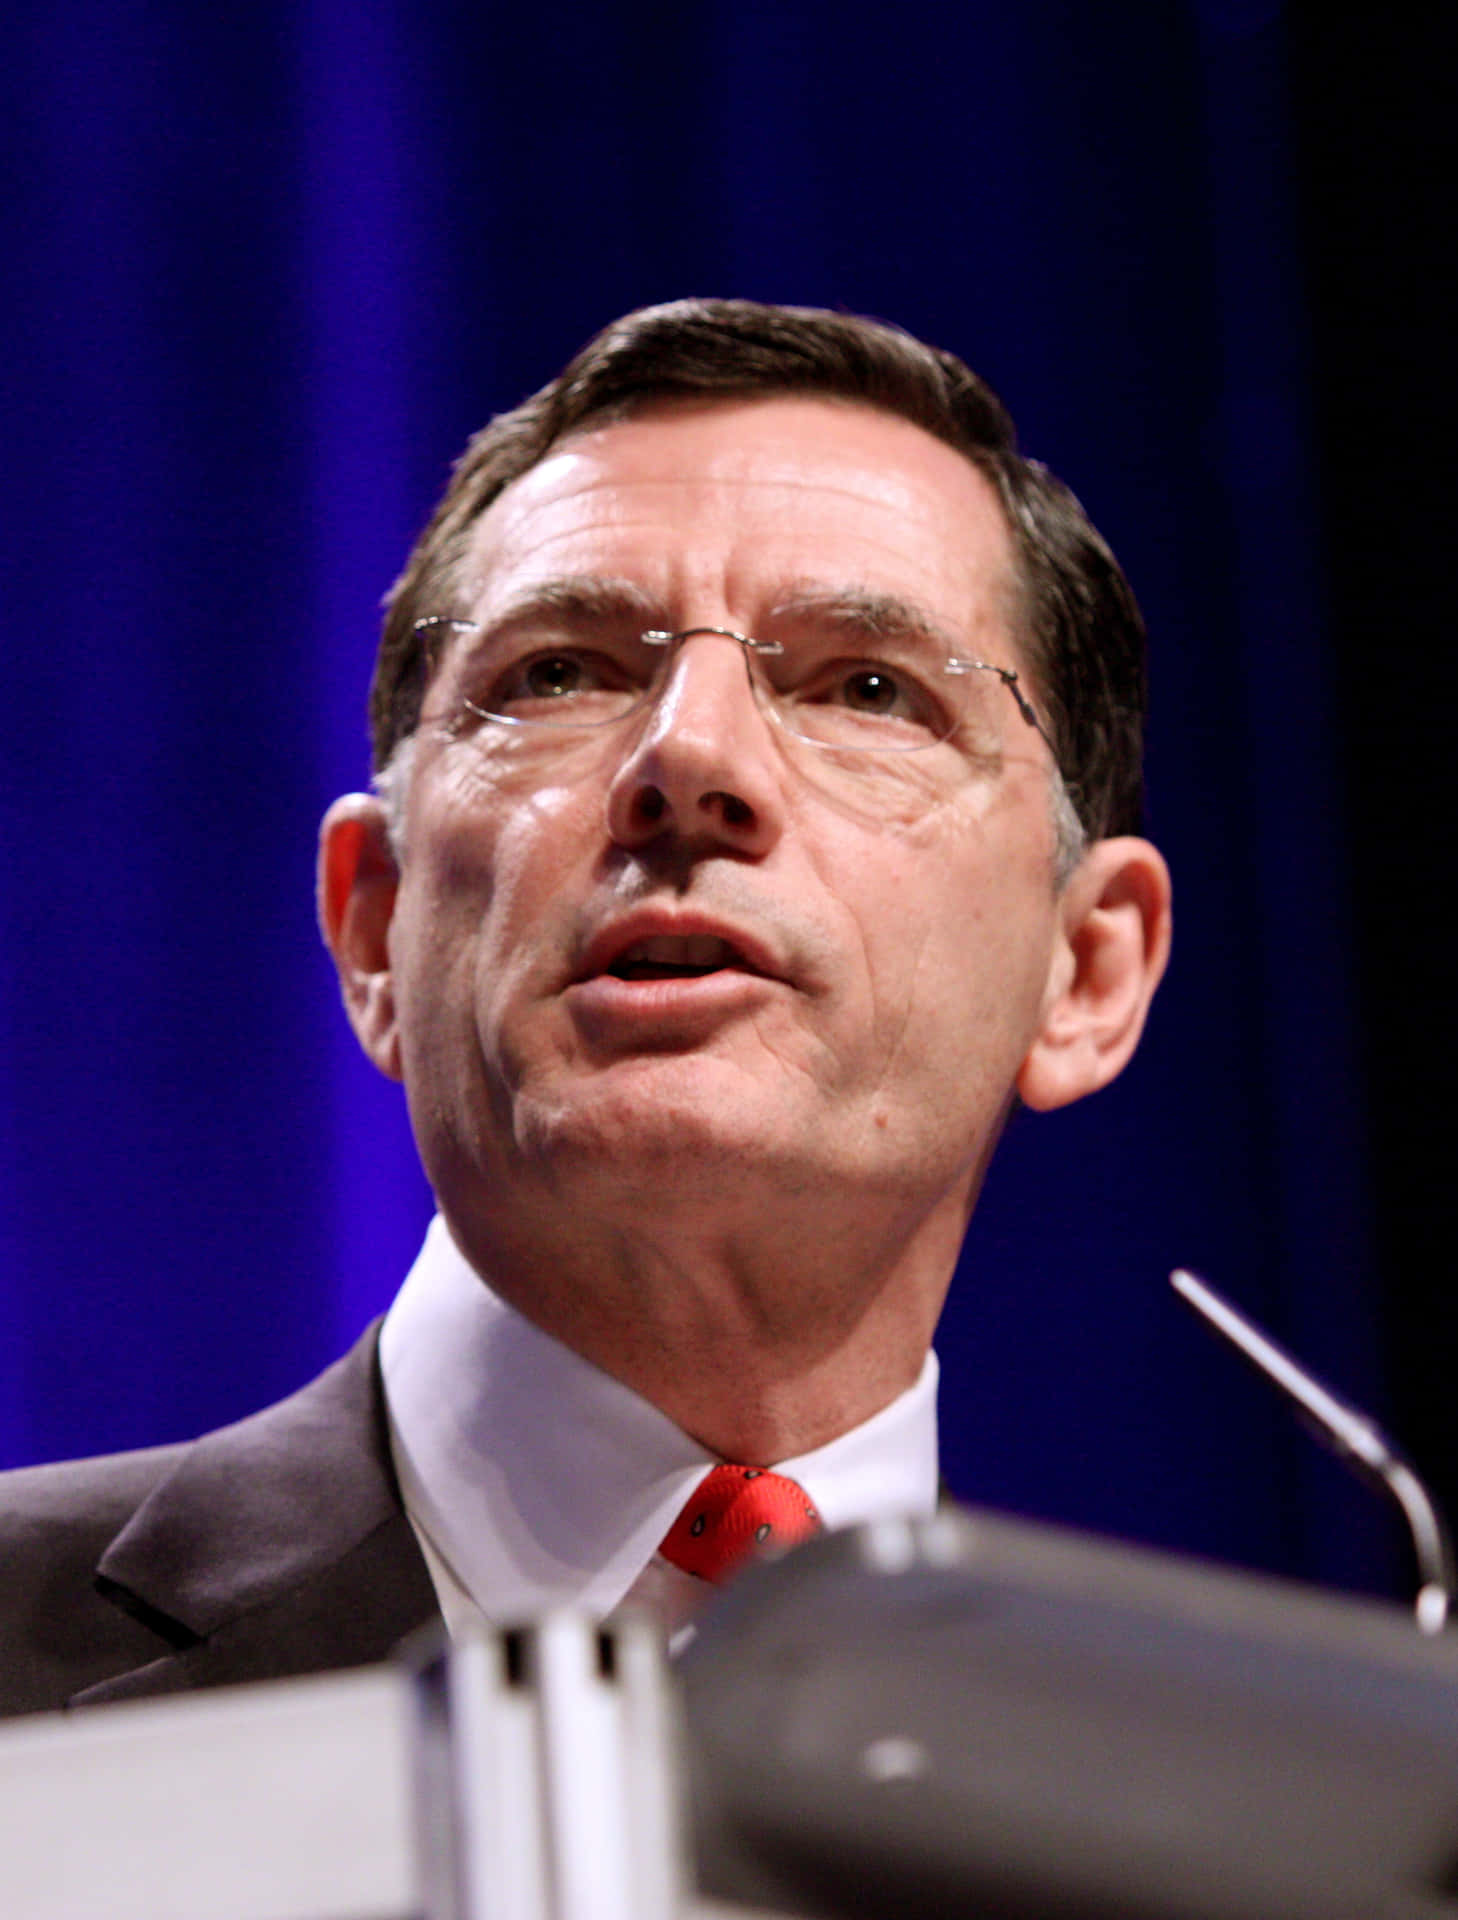 John Barrasso Photographed While Speaking Wallpaper